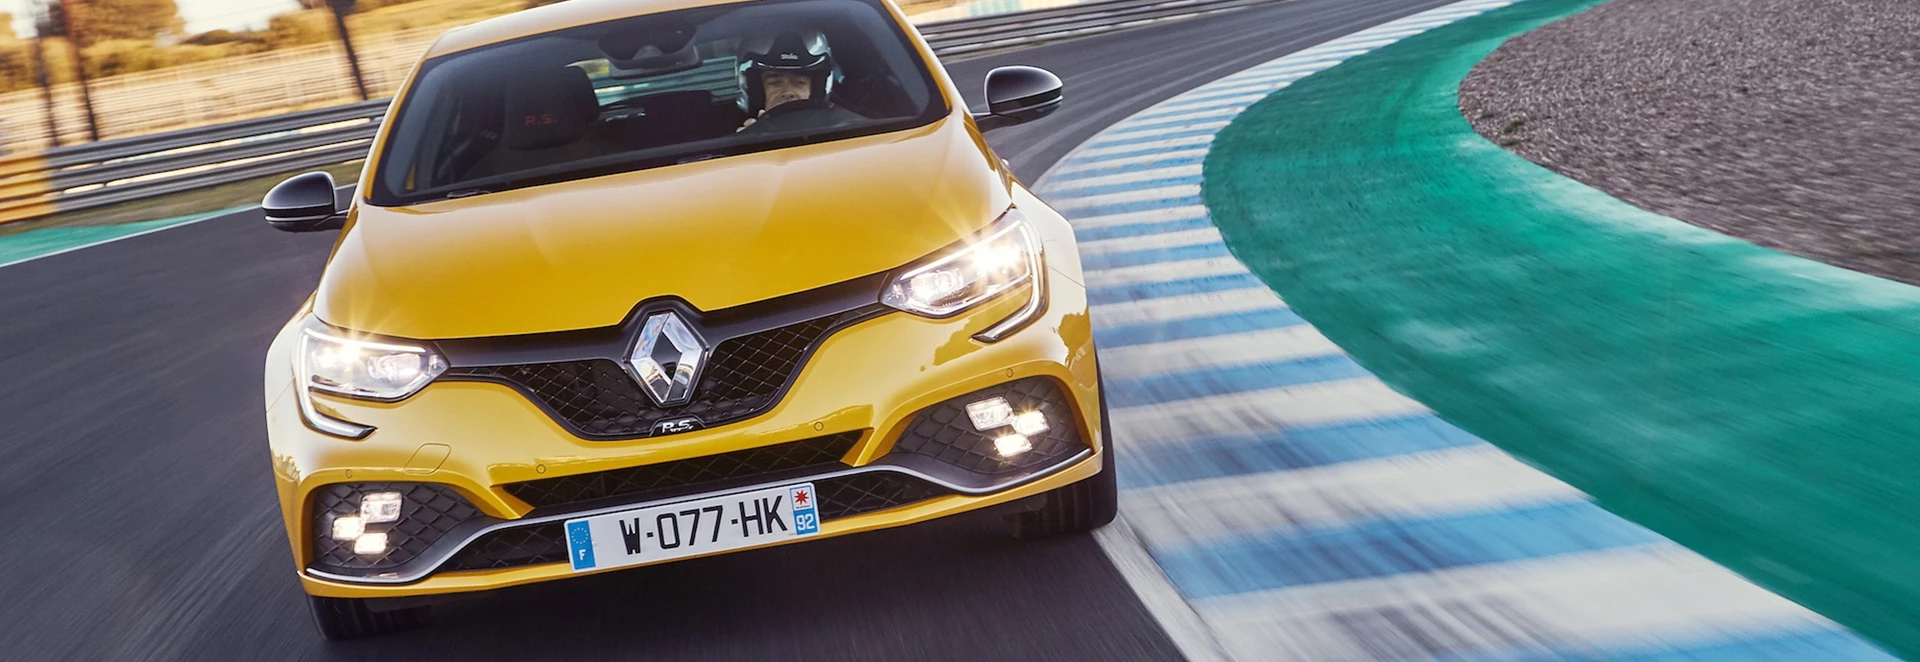 New 2018 Renault Megane R.S. on sale from £27,495